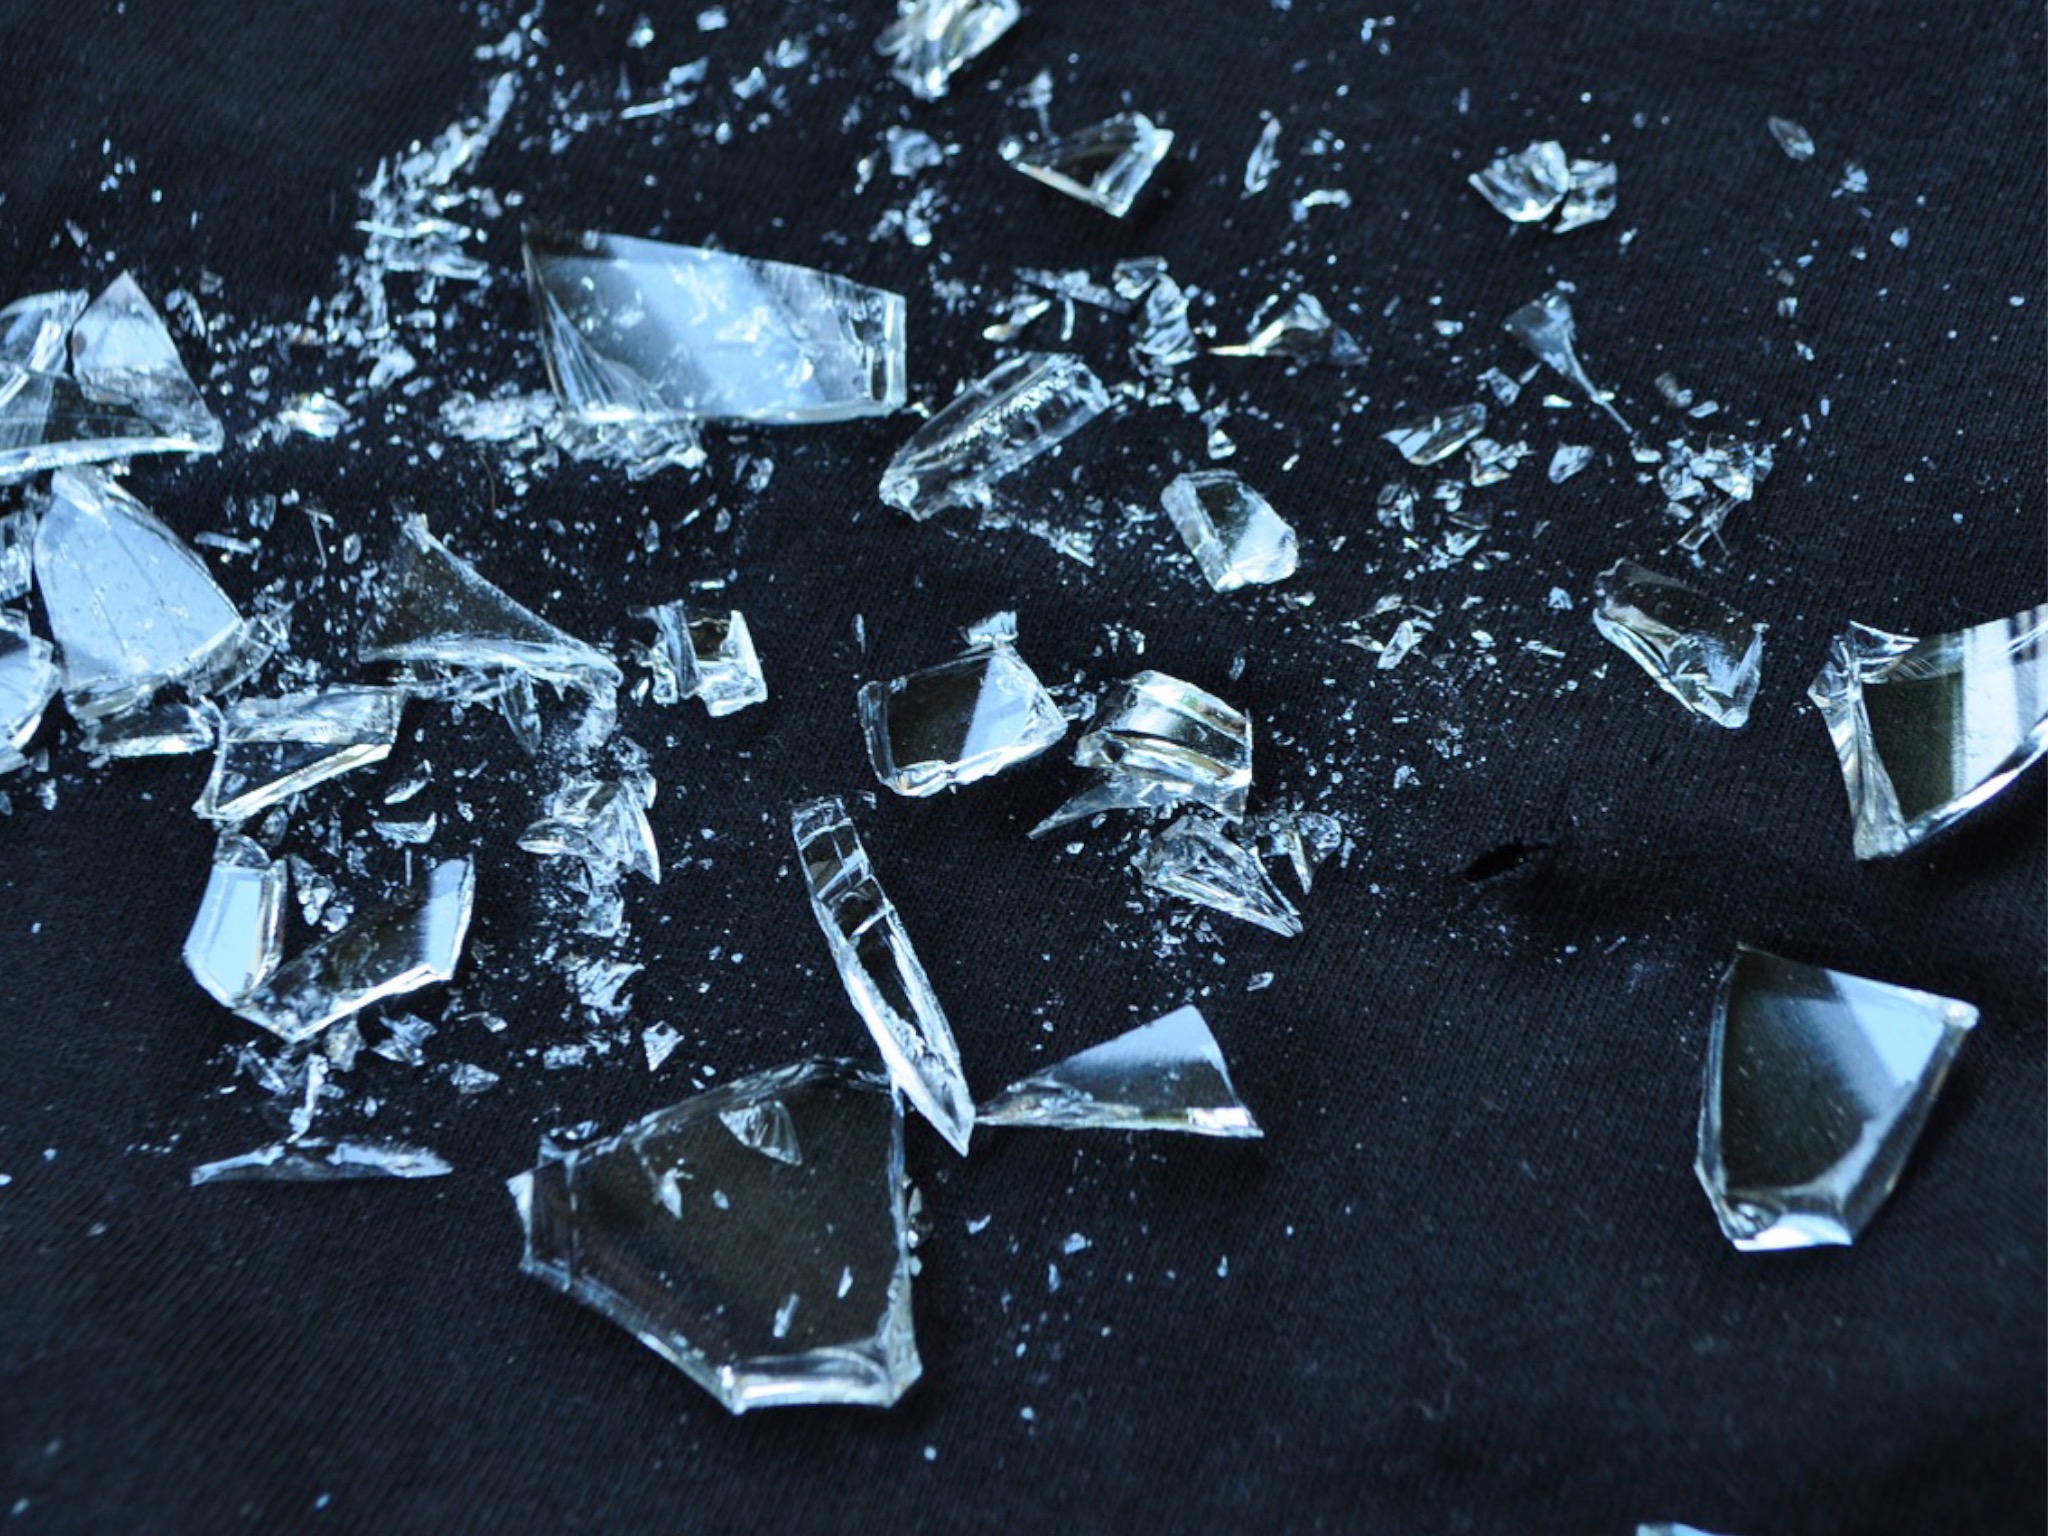 Don't put broken glass in your curbside bin. Wrap securely and leave separately for garbage collection.